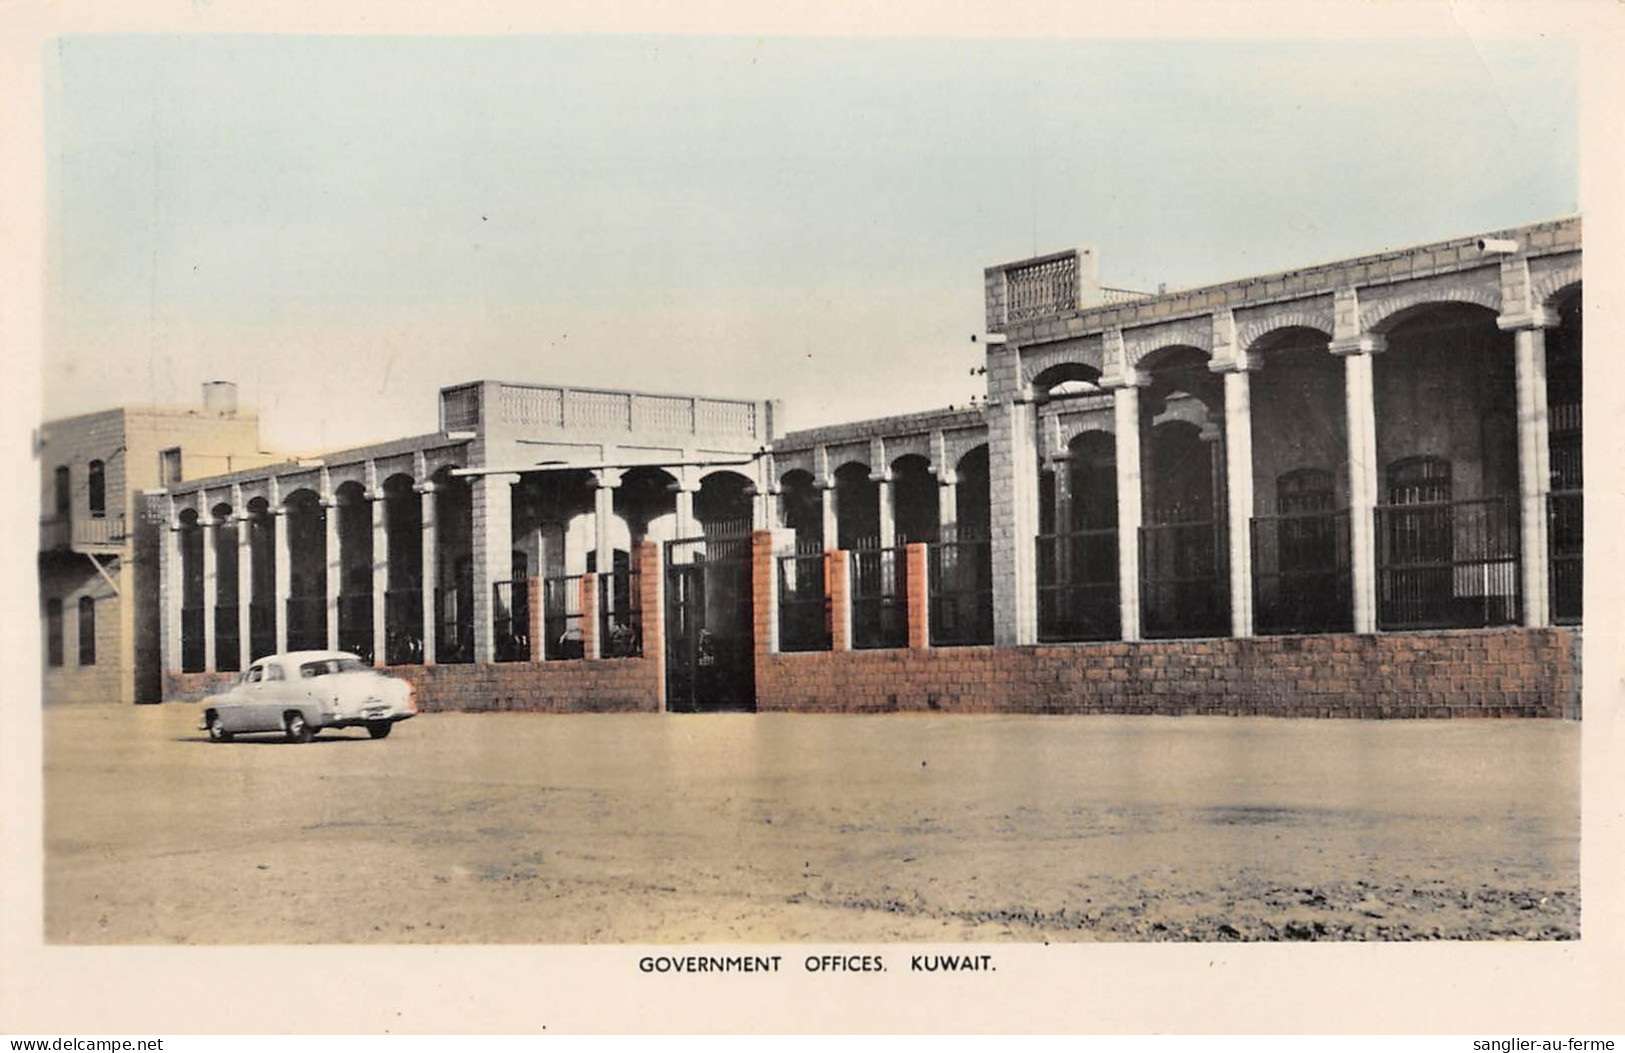 CPA / KOWEIT / GOVERNMENT OFFICES  / KUWAIT / Cpa Rare - Koweït